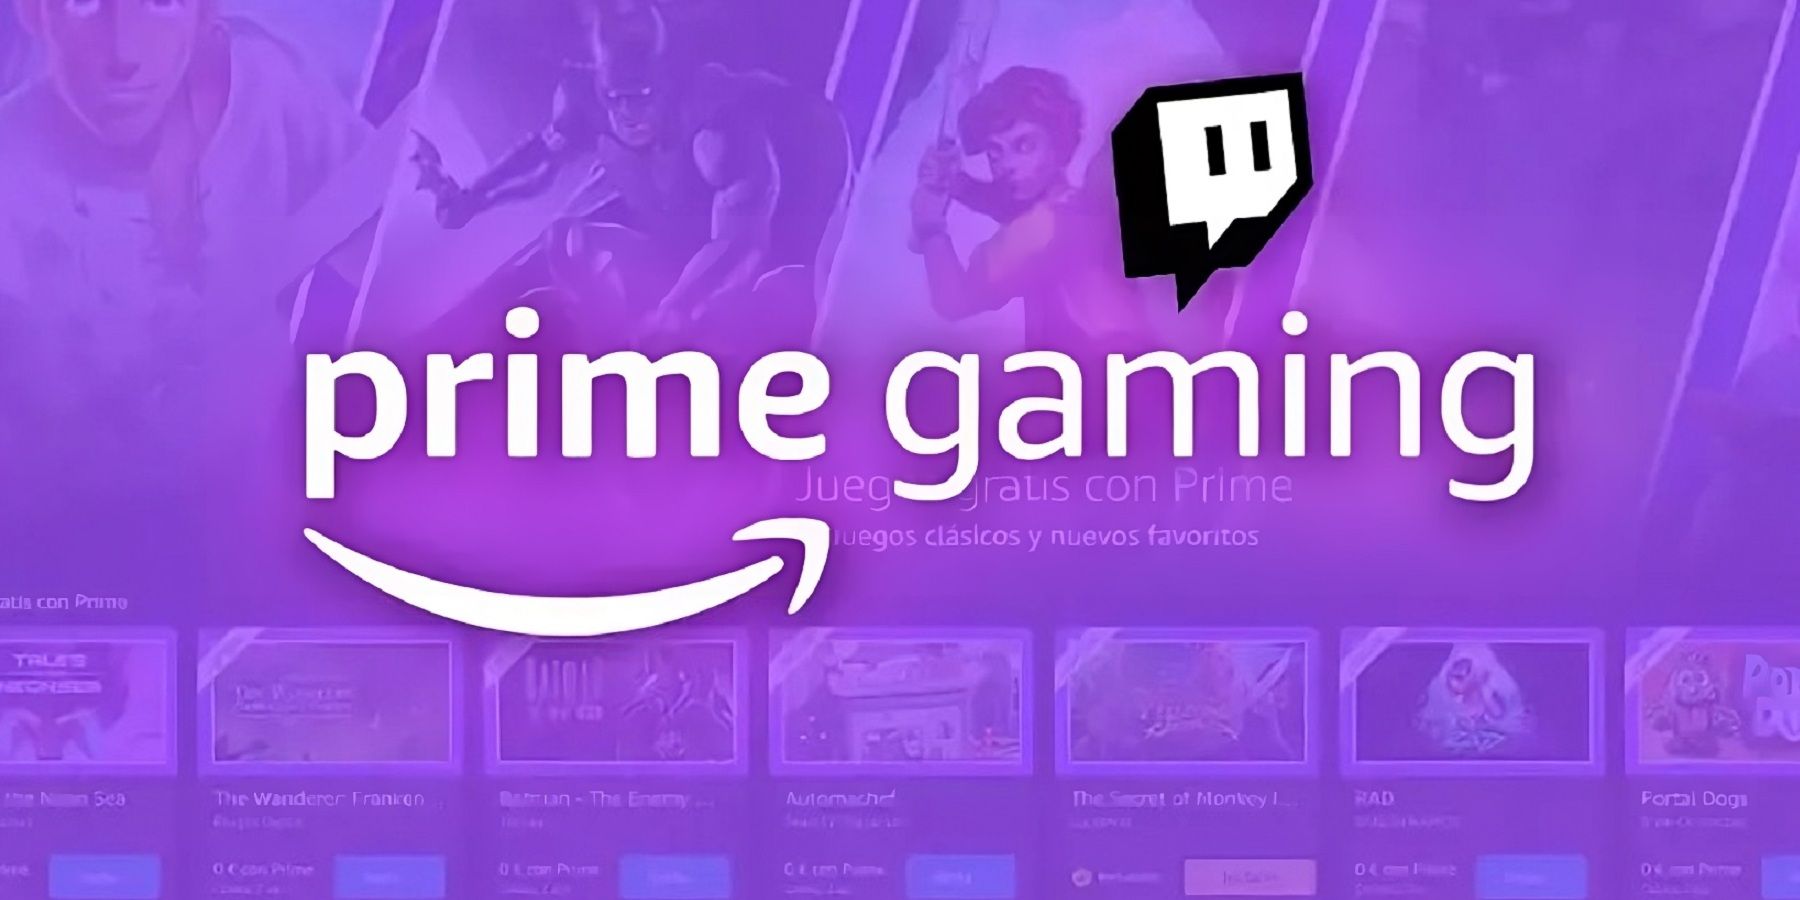 Prime Gaming Reveals Free Games for March 2023